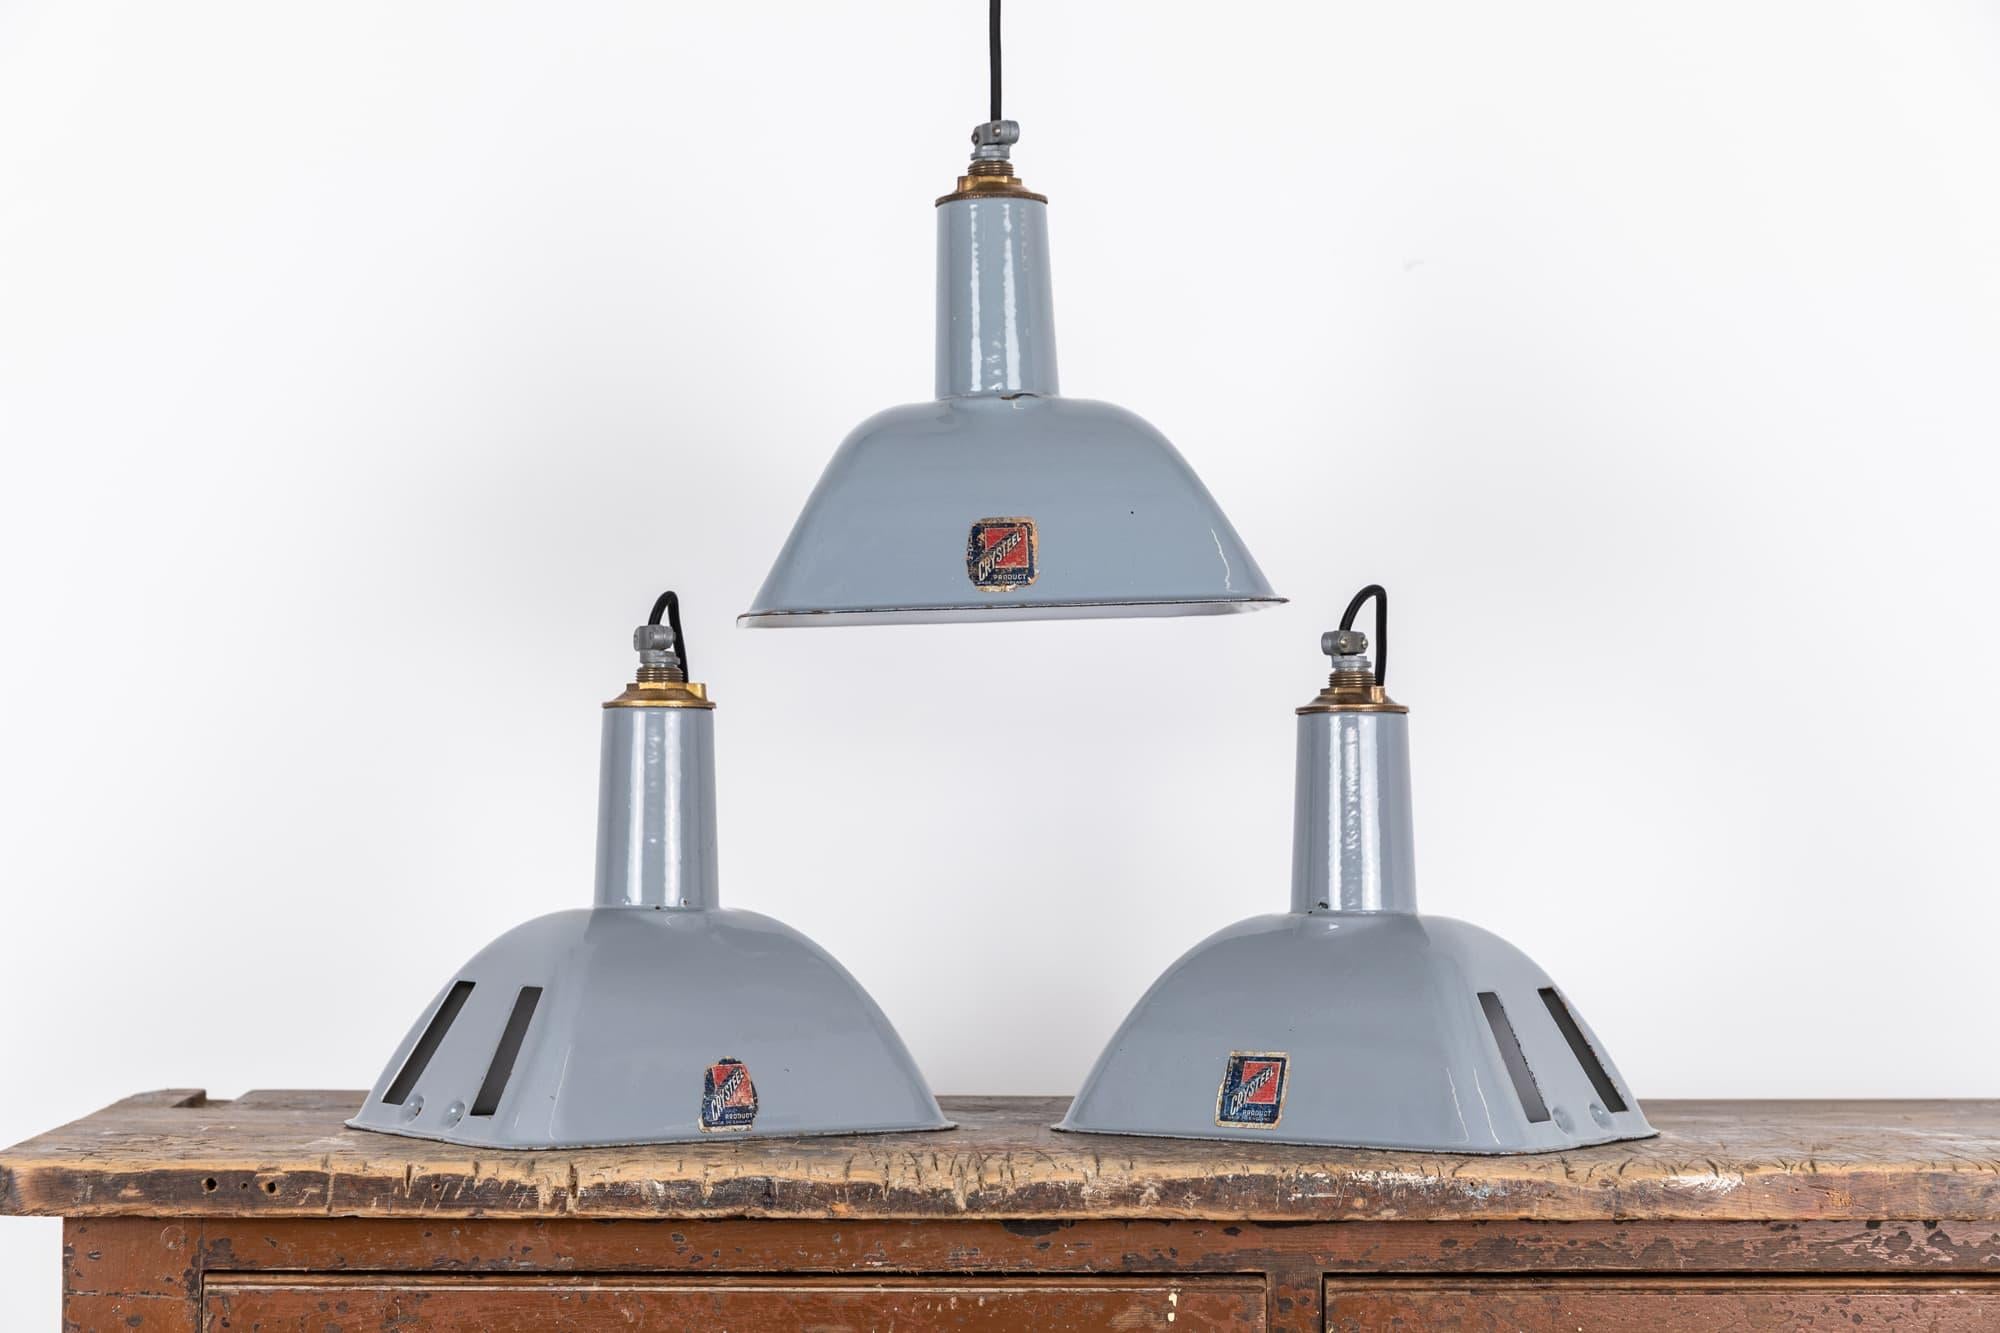 

Grey vitreous enameled pendant lights by renowned industrial manufactures Benjamin Electric. c.1930

In a smaller size and unusual rectangle shape, surviving in amazing original condition, with very little wear to the enamel and remnants of the